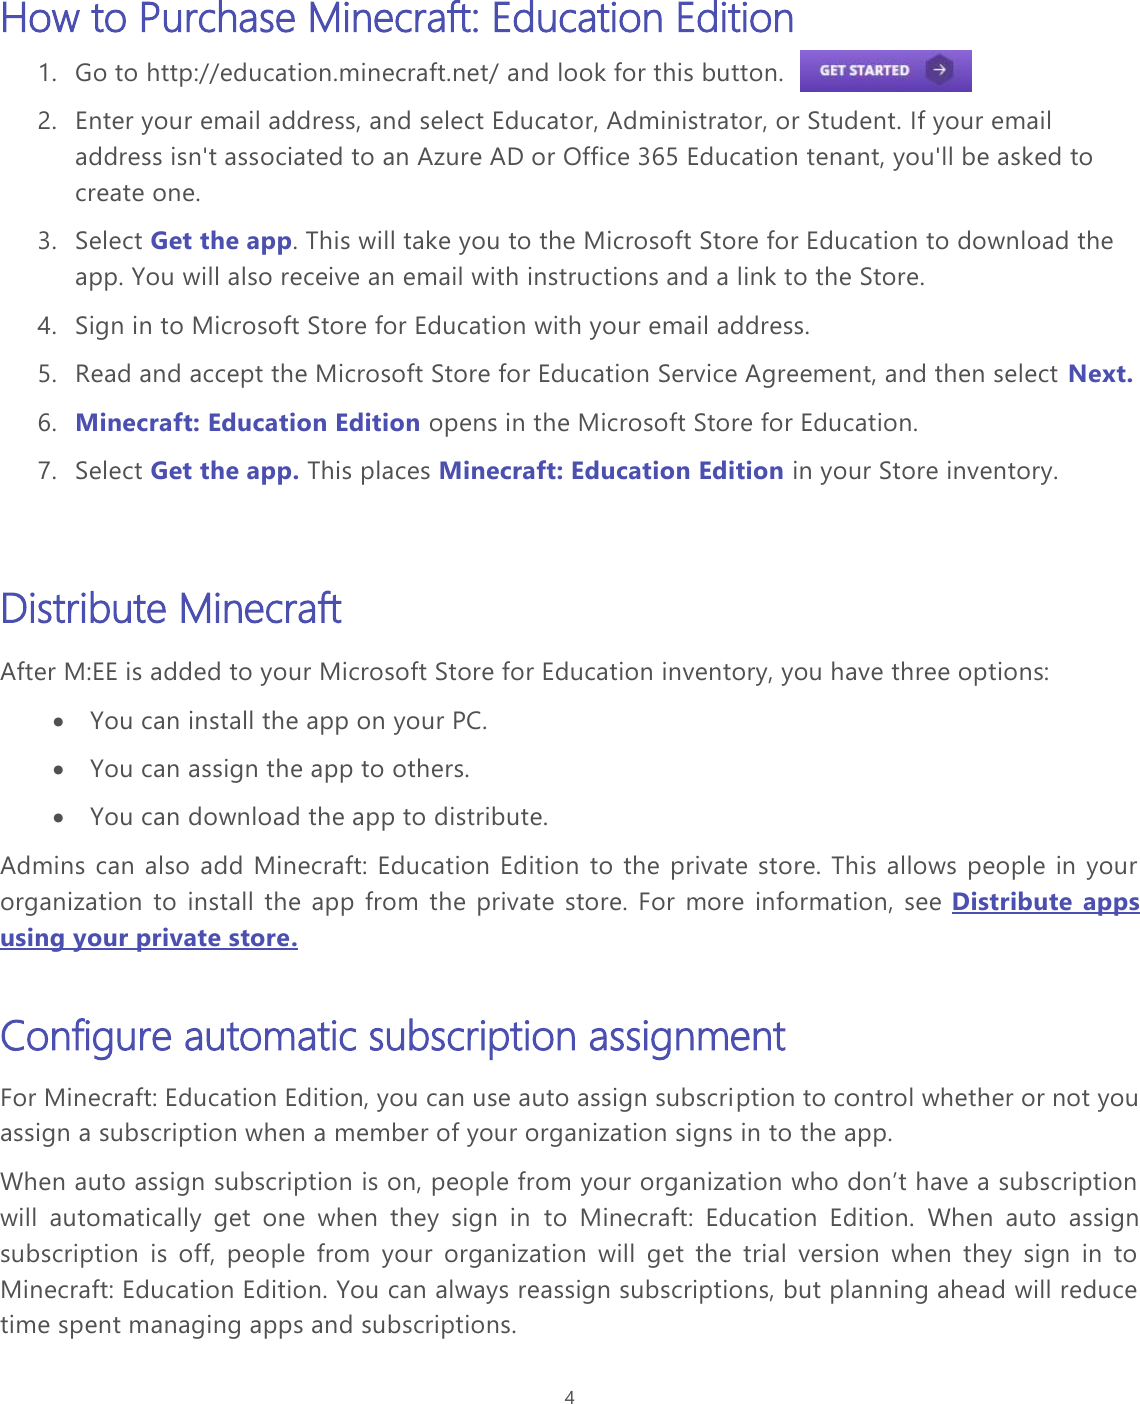 Page 4 of 11 - Microsoft Teams Team Leader Getting Started Guide MEE Educator Deployment